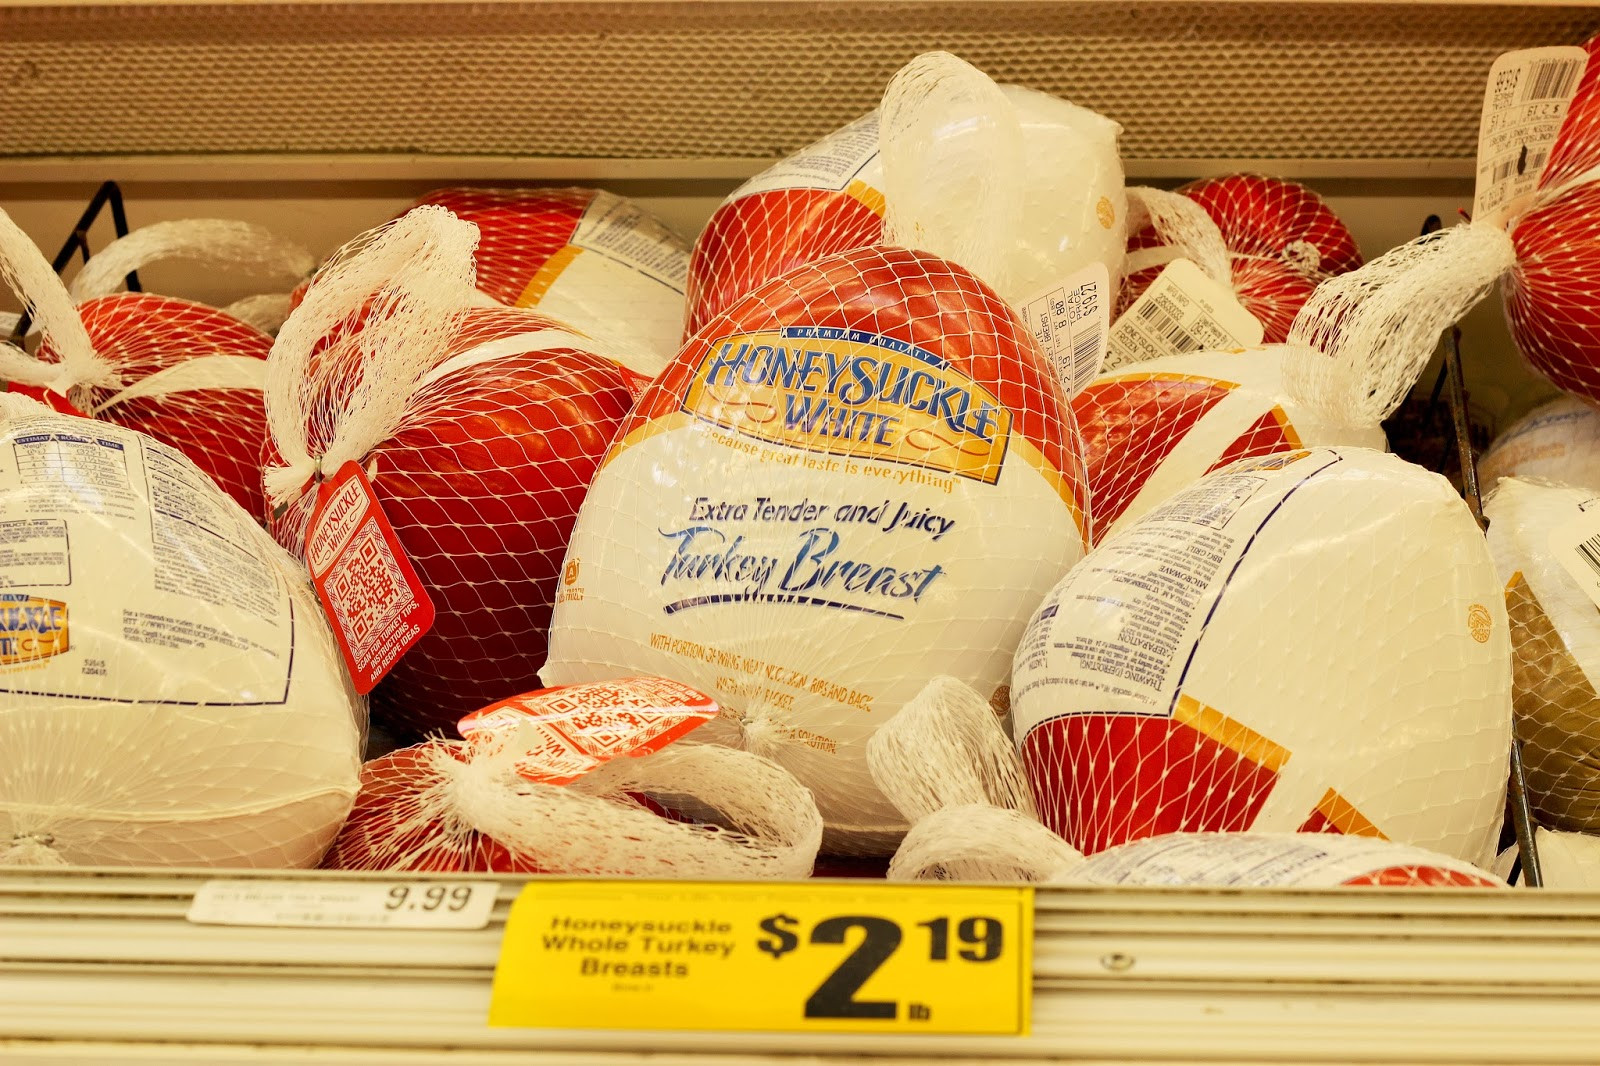 Honeysuckle White Turkey Breasts
 Diddles and Dumplings FreshFinds at Save Mart